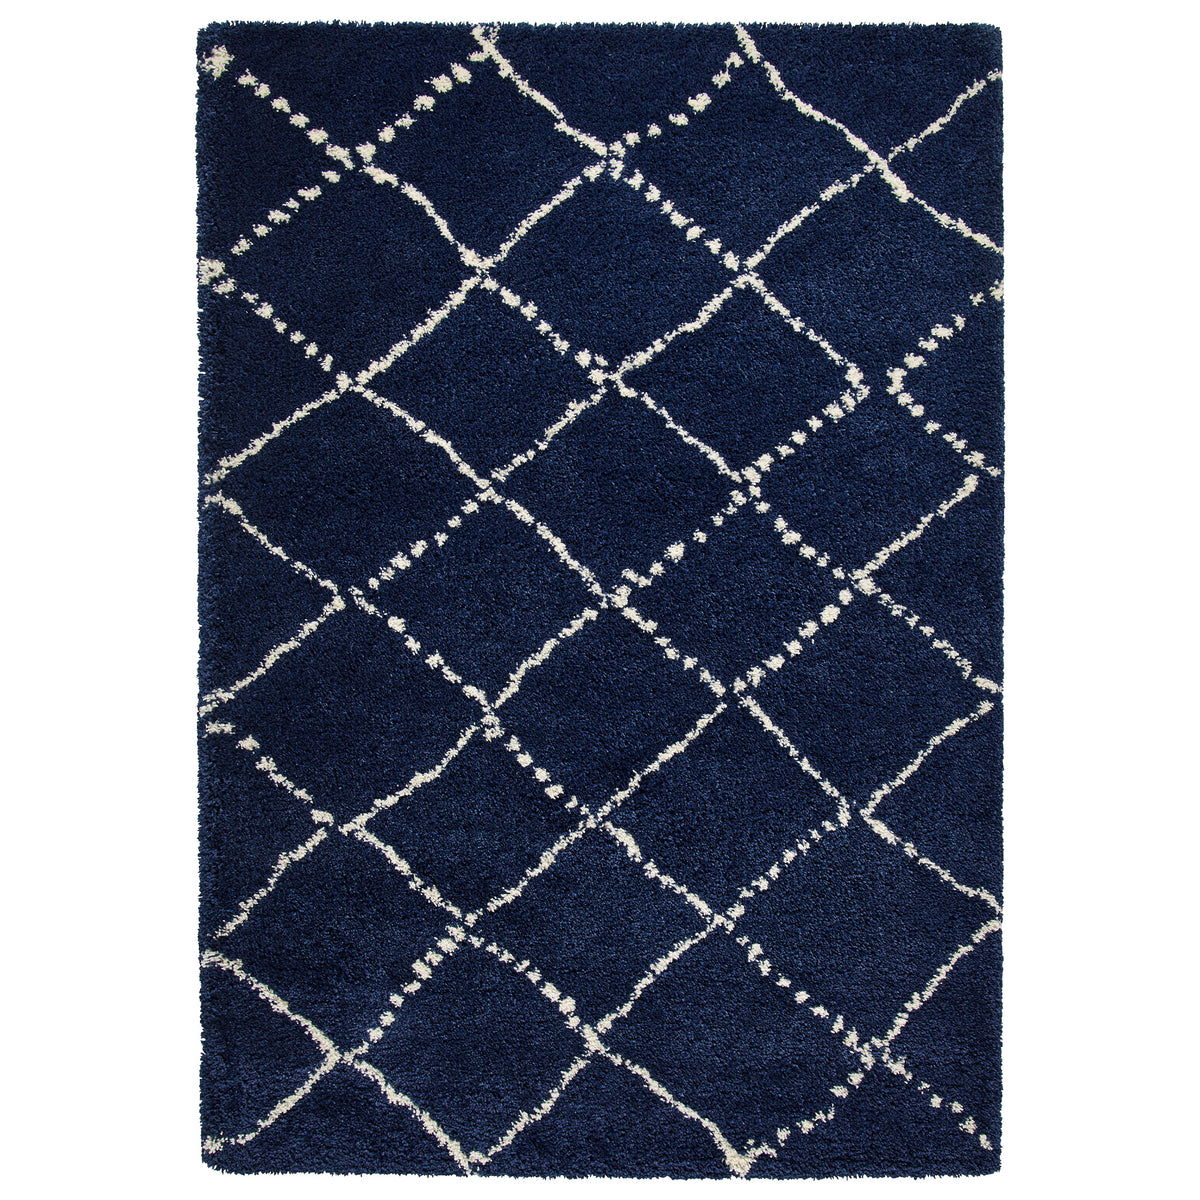 Webster Navy Blue Diamond Two Toned Rug from Roseland Furniture